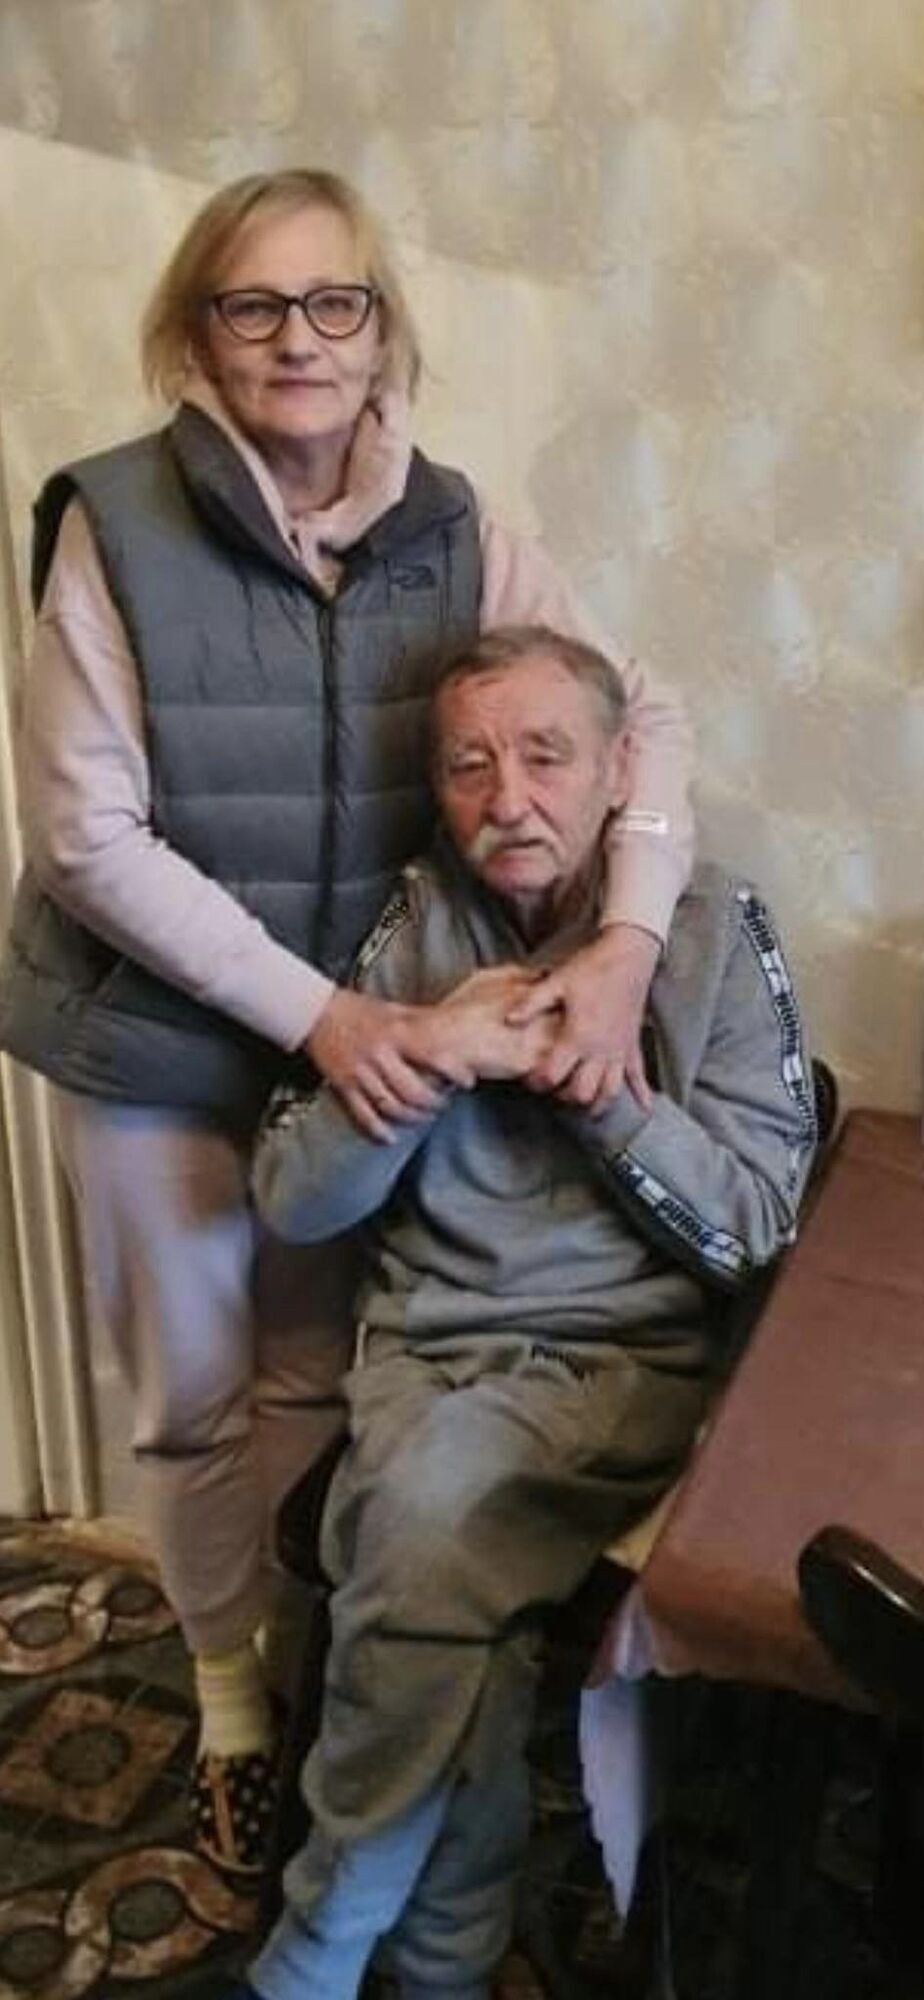 The blast wave threw him onto his bed. 82-year-old composer Poklad and his wife were injured in a Russian missile attack: They used to be in the occupied territory.